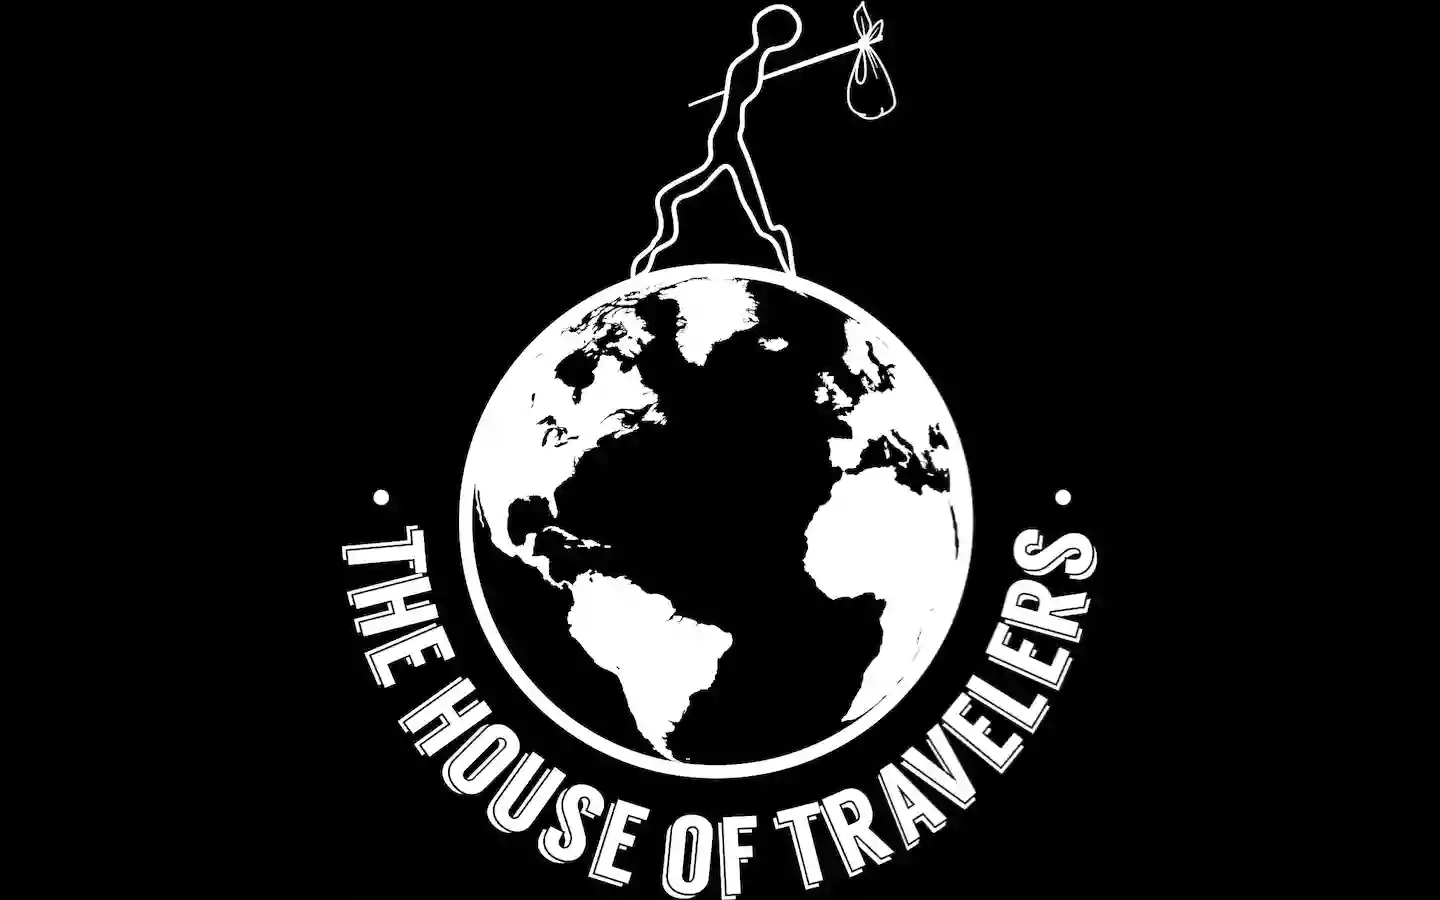 The House Of Travelers - Gestione Immobili - Lake Como events - Property manager- Lake Como villas